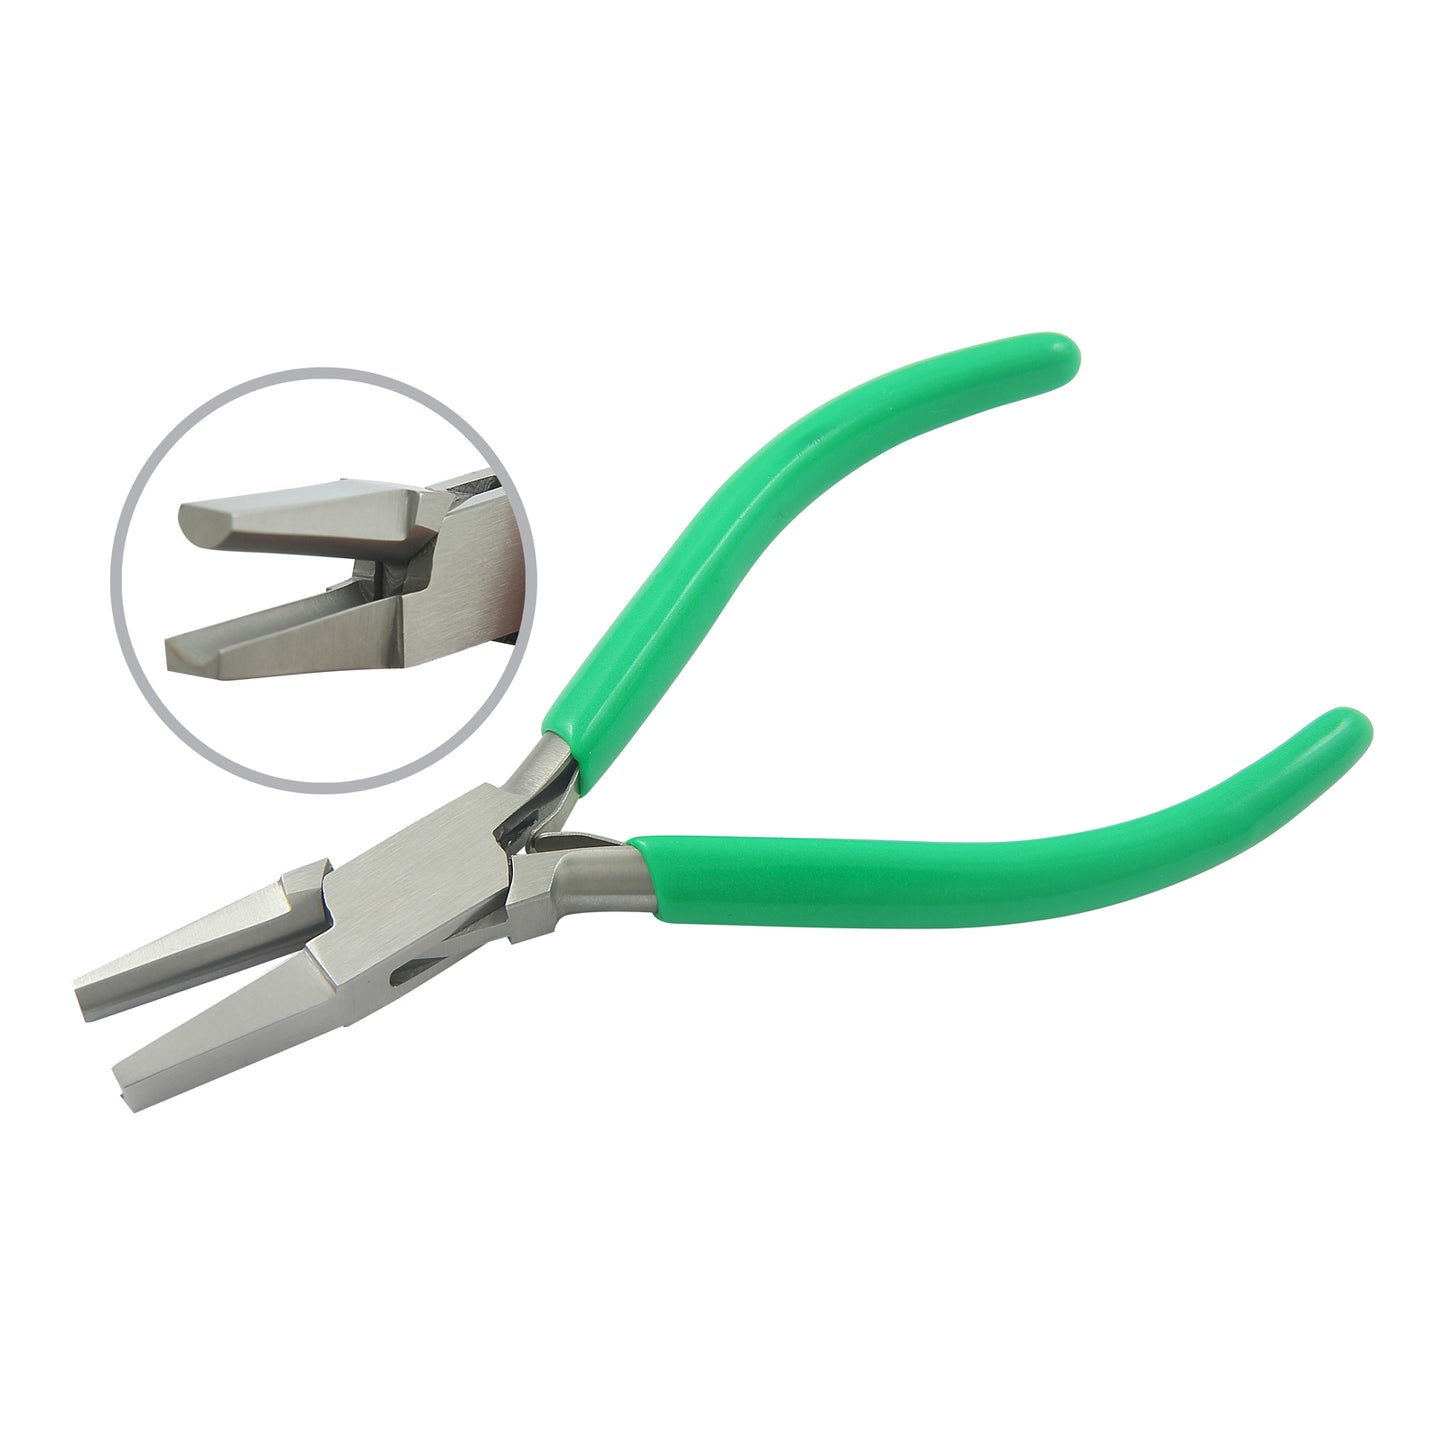 Concave & half round plier Size: 130mm with double leaf spring & PVC handles